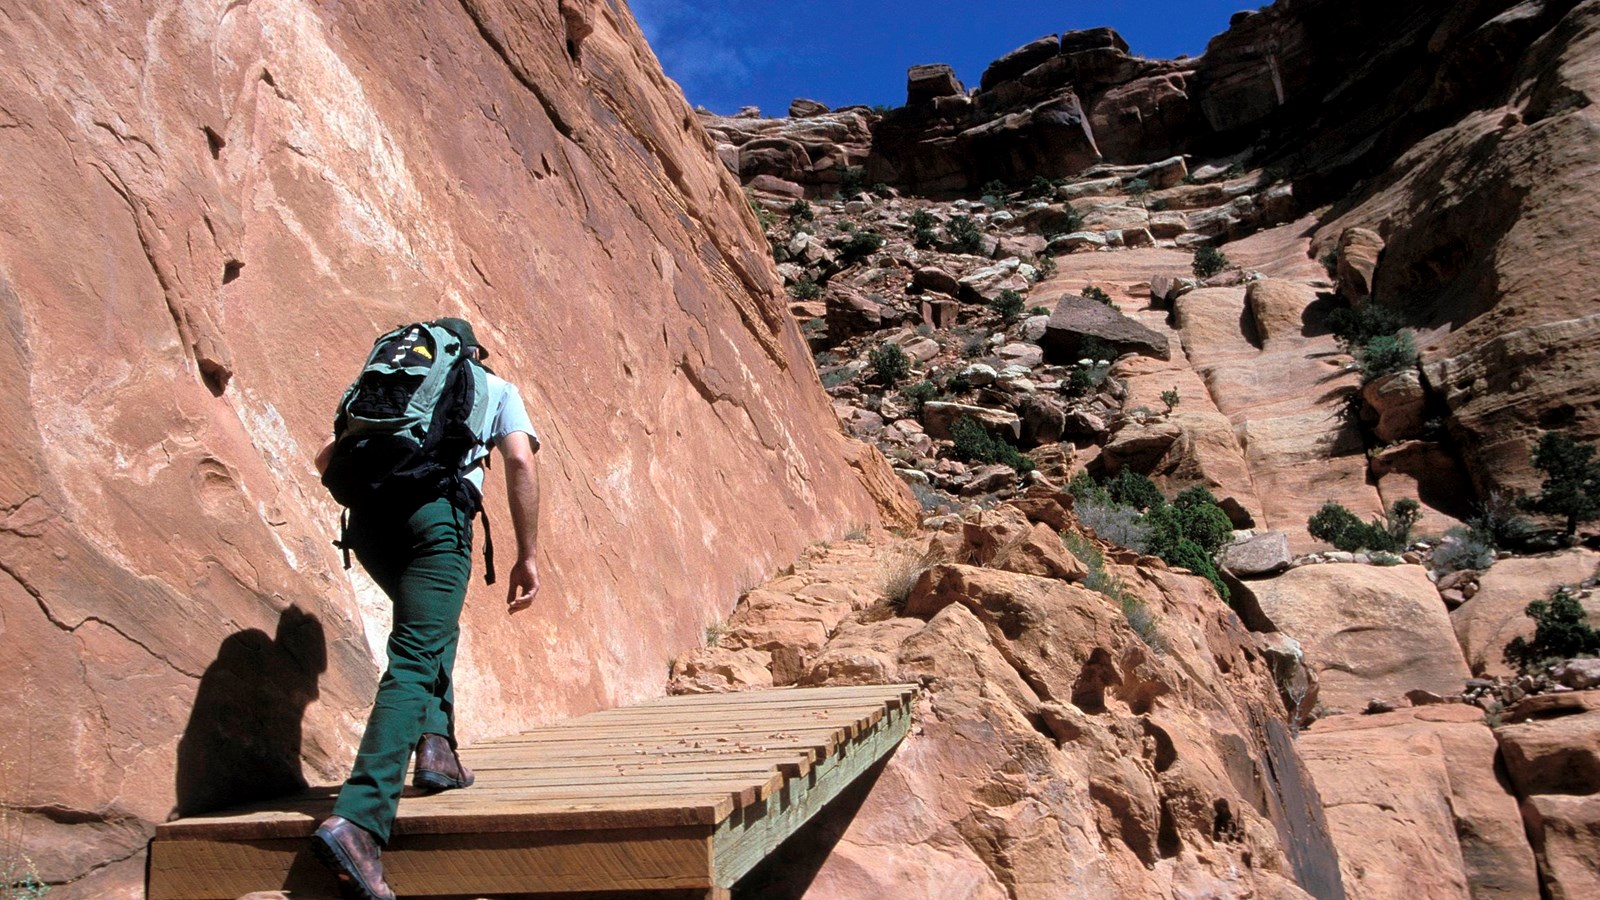 A hiker steps up onto a wooden bridge to ascend a steep canyon trail